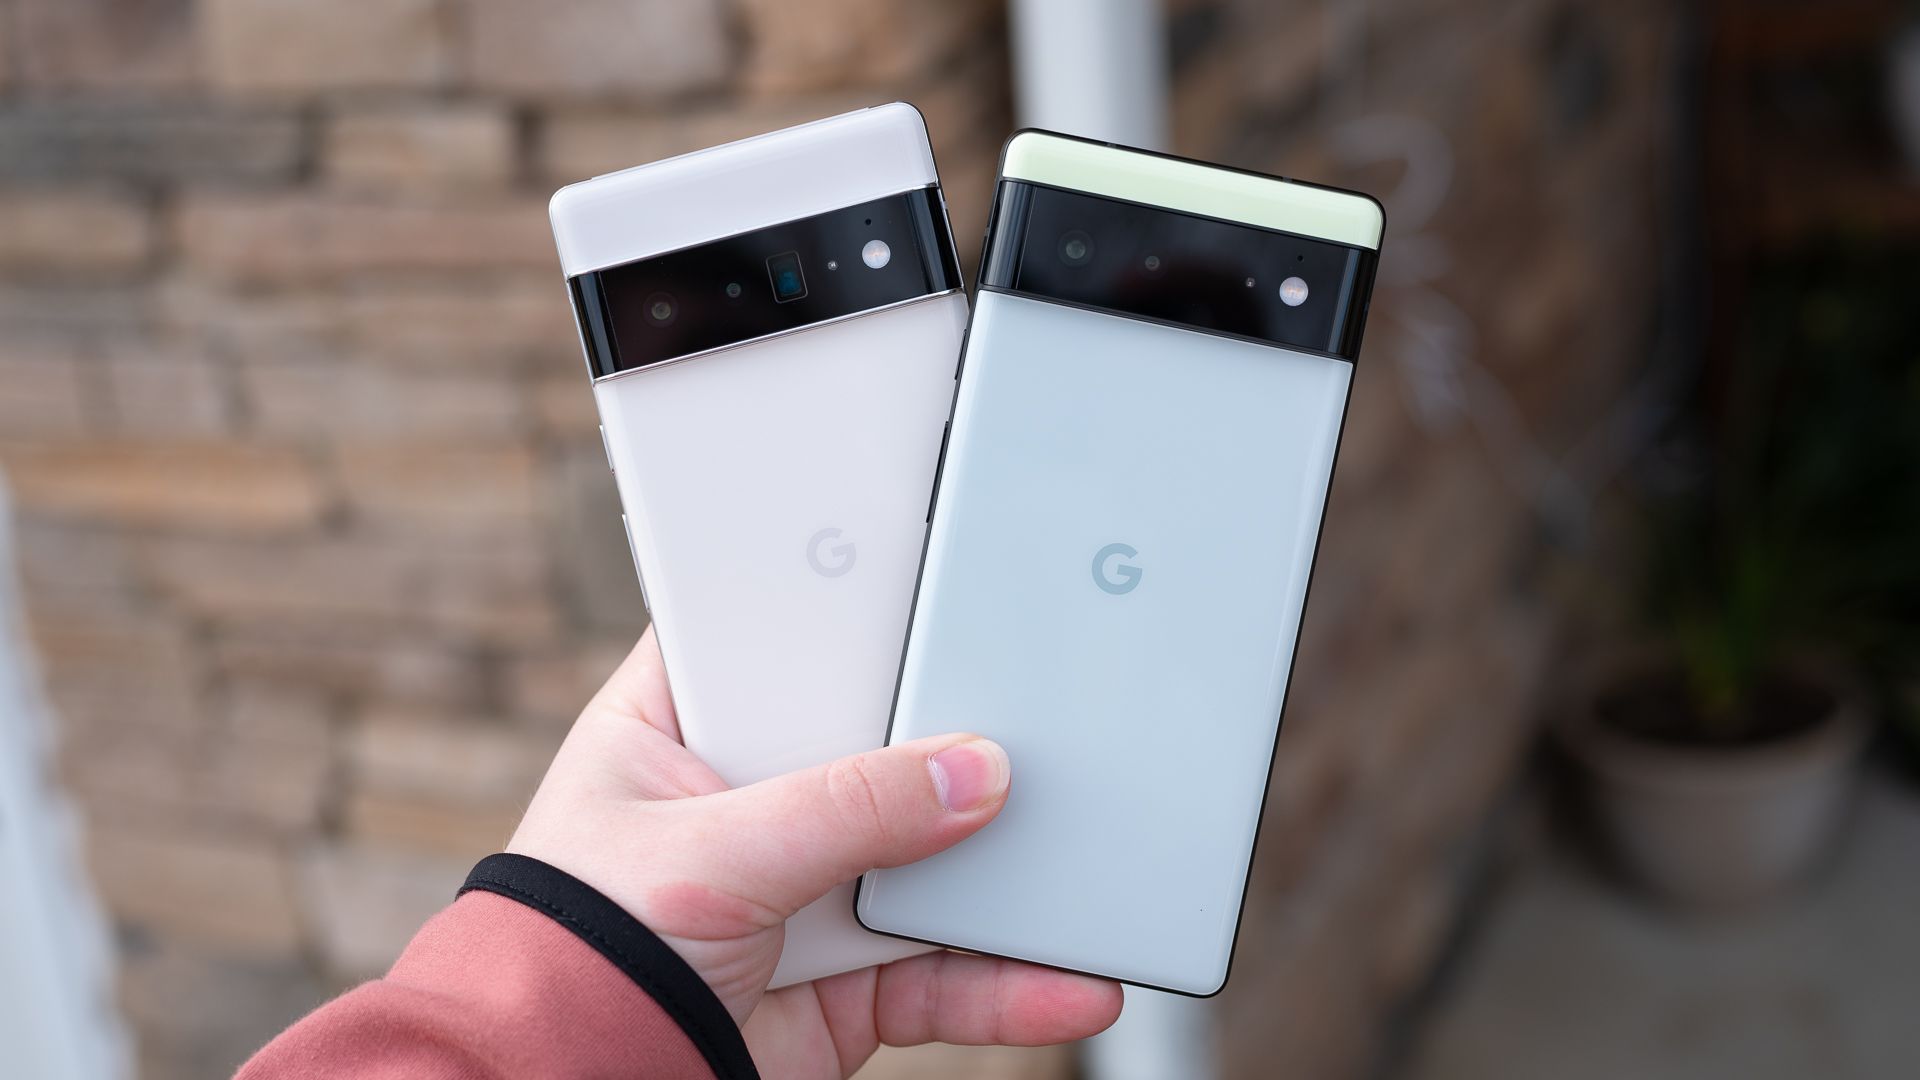 Pixel 6 Pro and Pixel 6 side by side in a hand. 